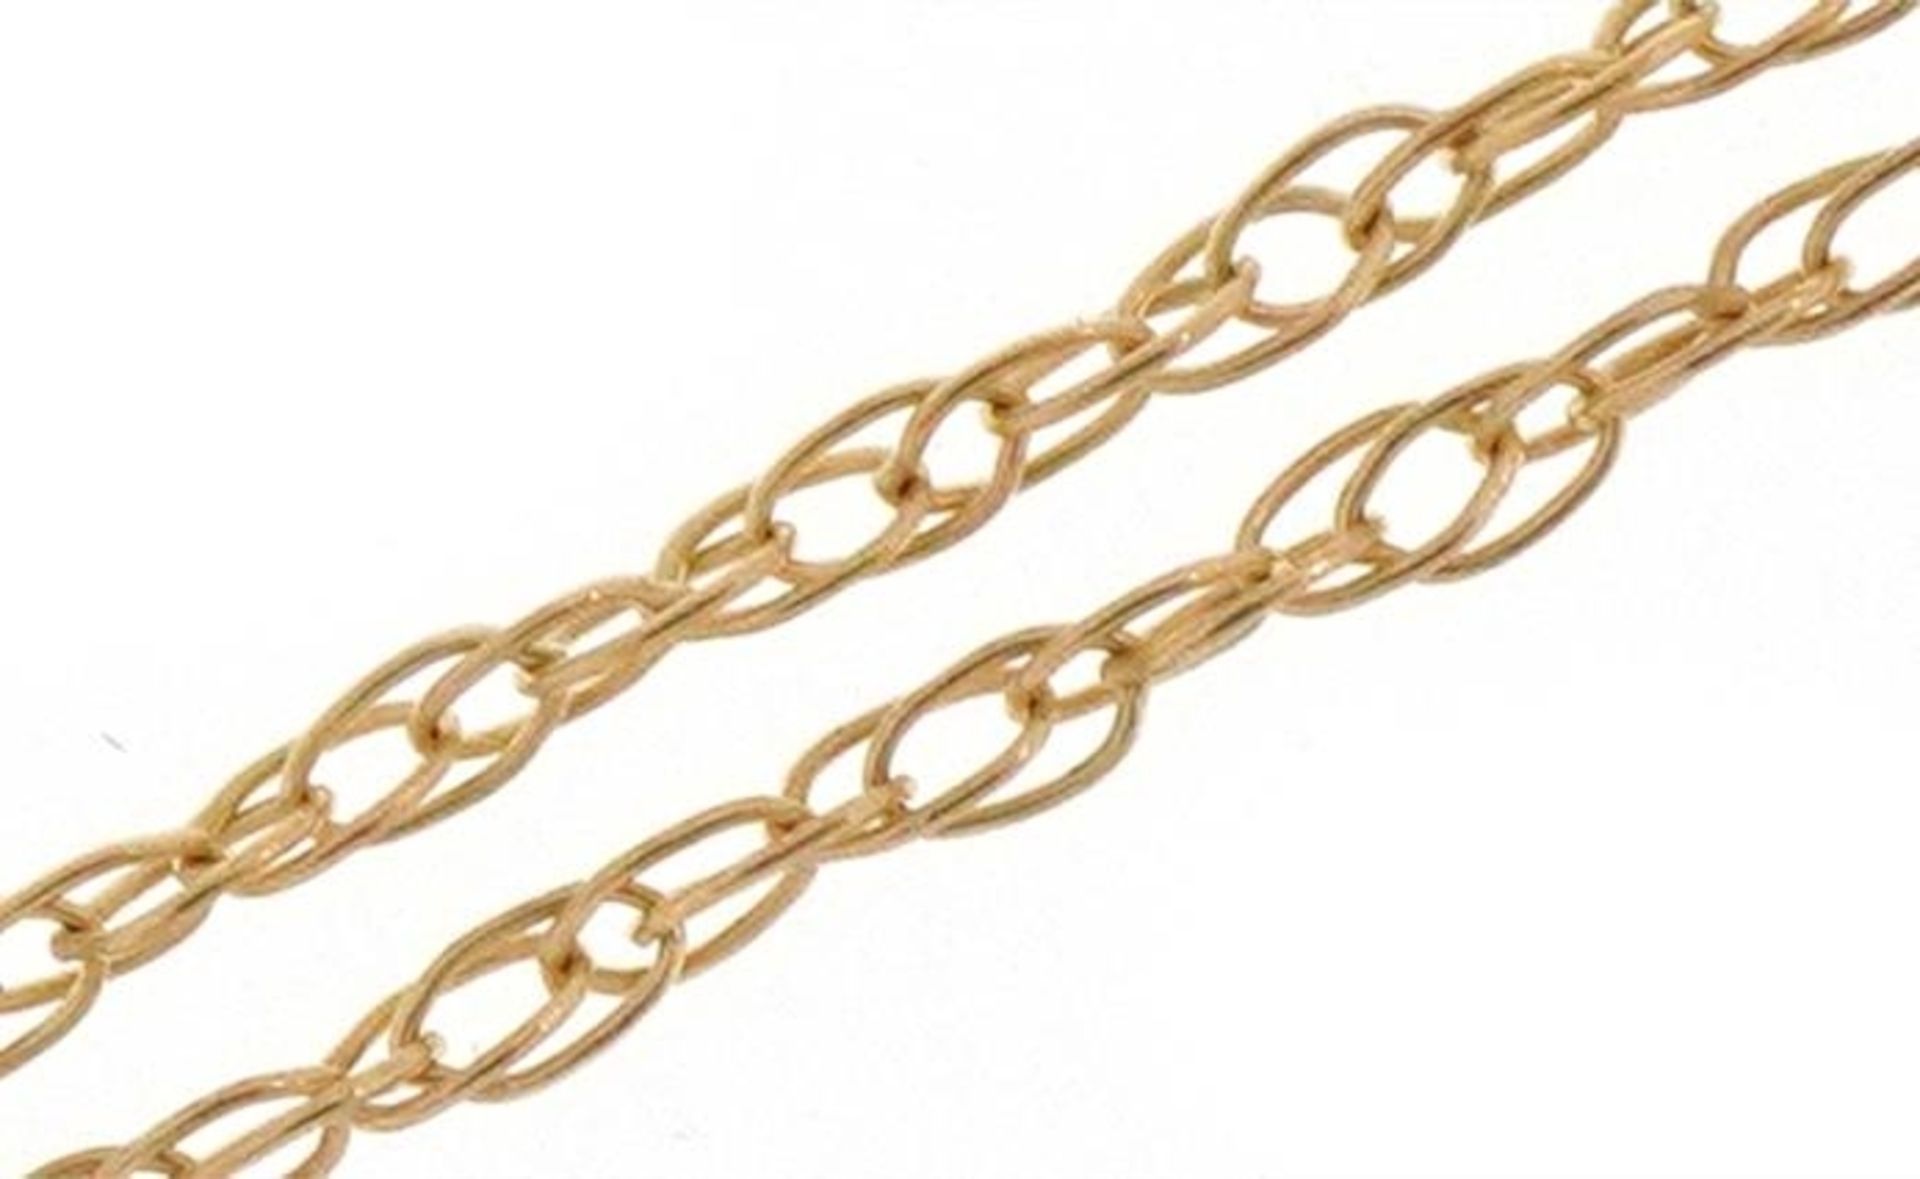 9ct gold fine chain link necklace, 40cm in length, 0.7g